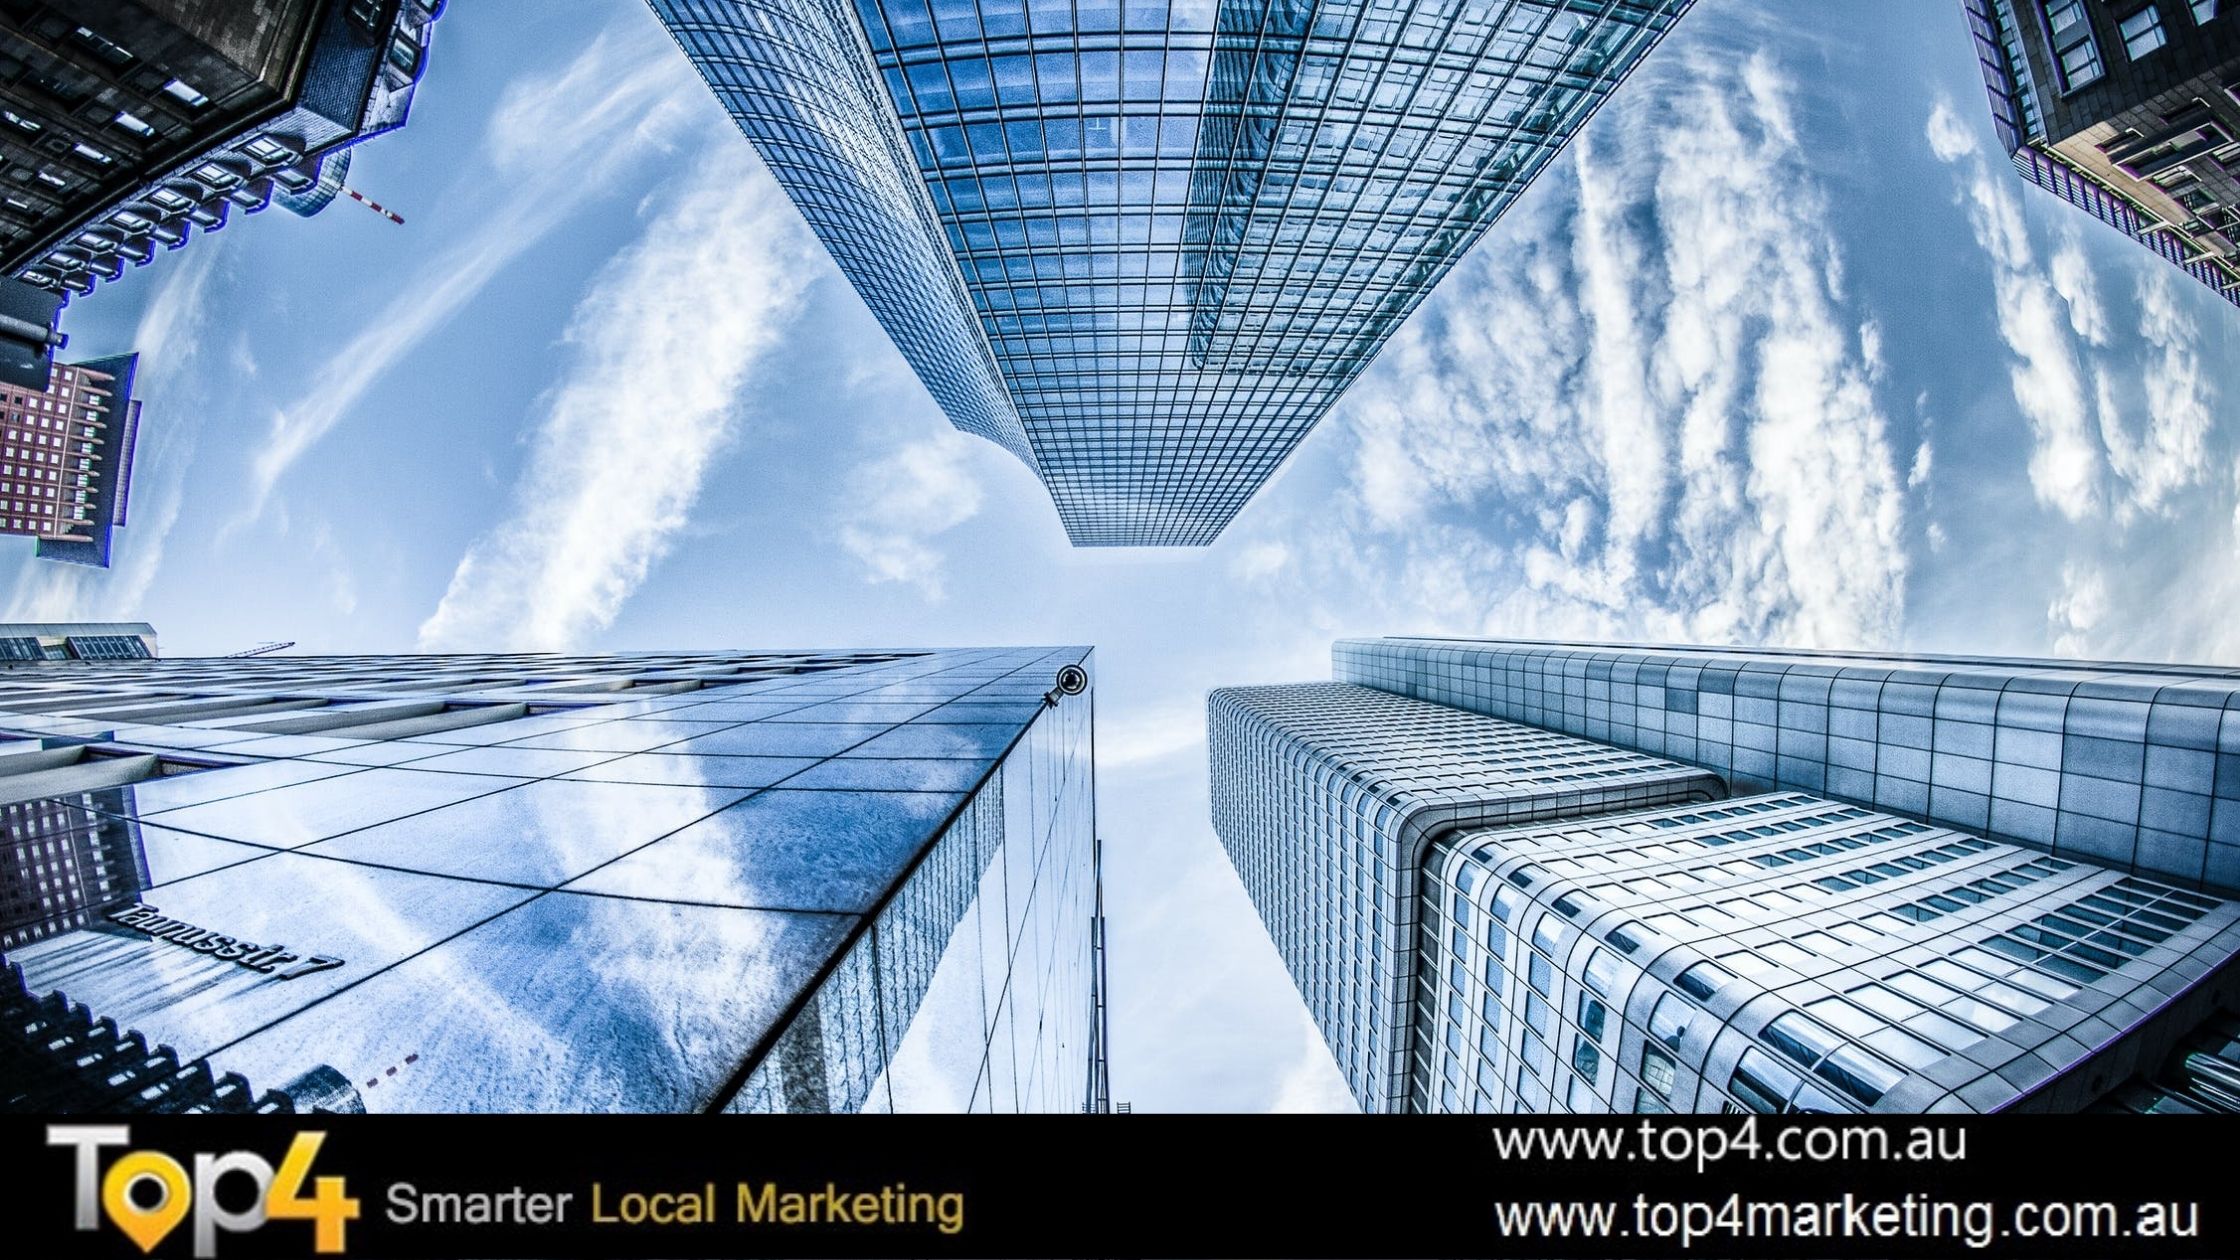 Small Business Local Marketing - Top4 Marketing